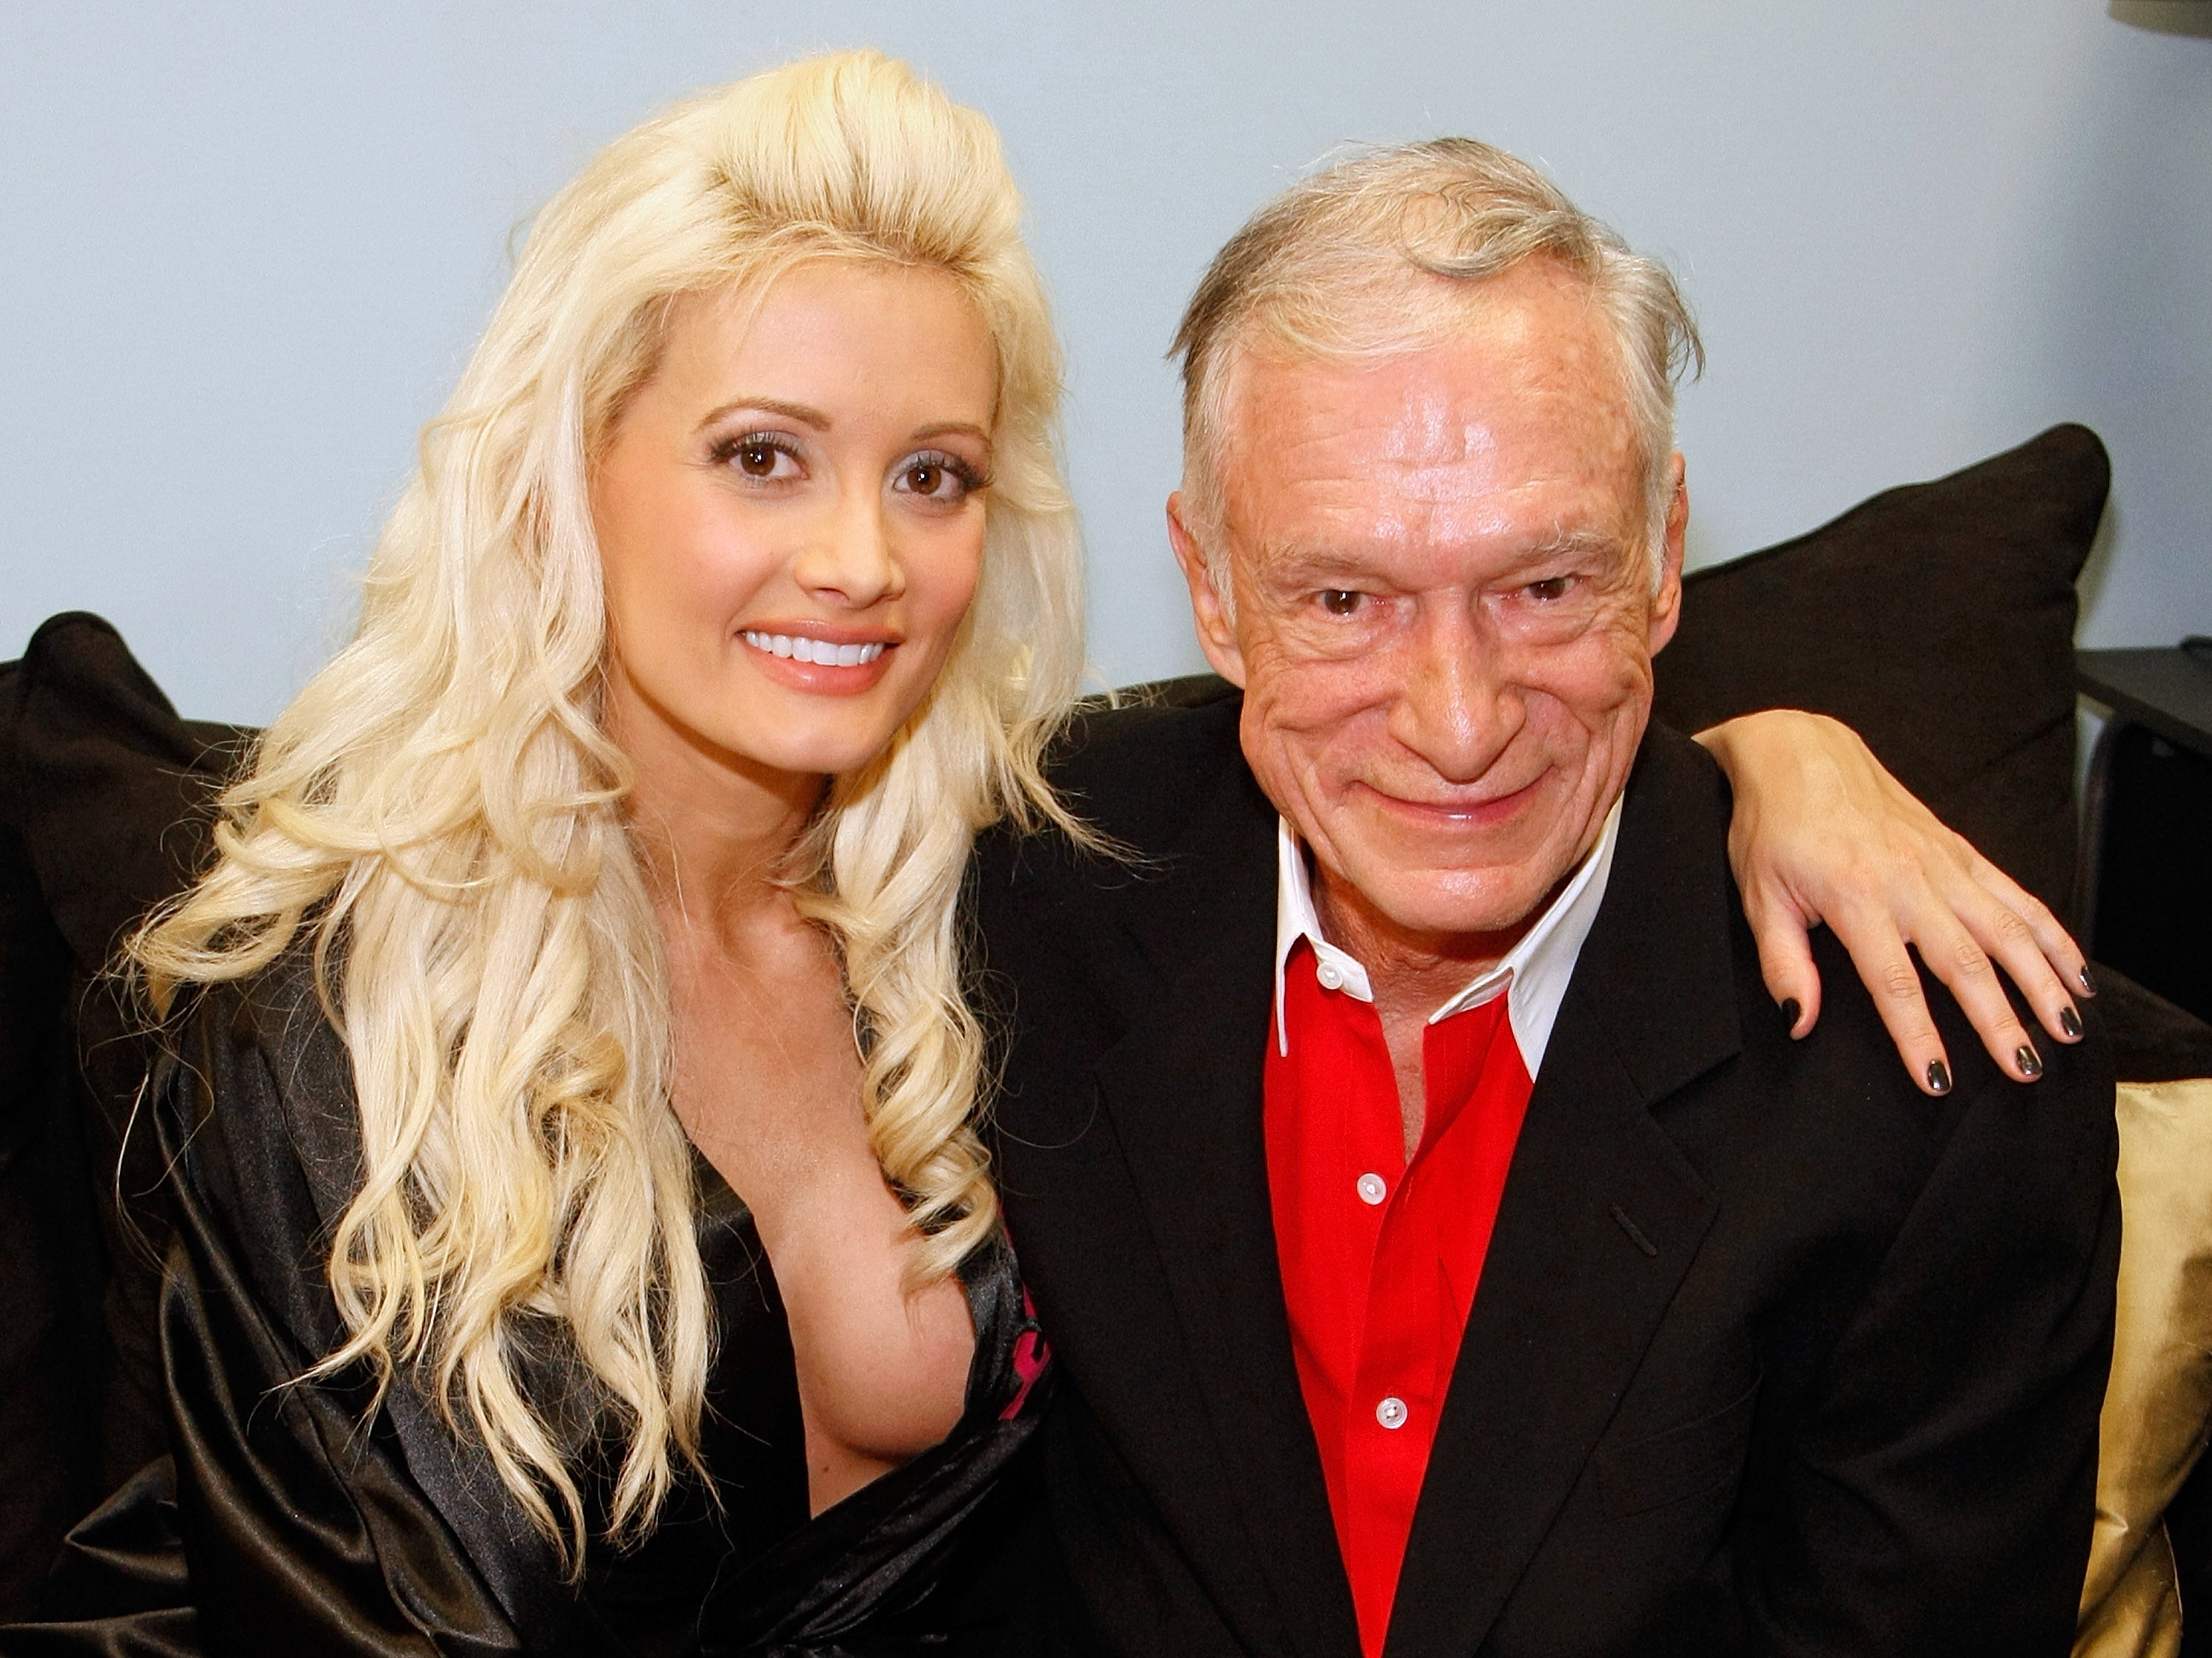 Television personality and model Holly Madison (L) and Playboy founder Hugh Hefner appear in Madison's dressing room after Hefner attended the adult production, "PEEPSHOW" starring Madison at the Planet Hollywood Resort & Casino July 18, 2009